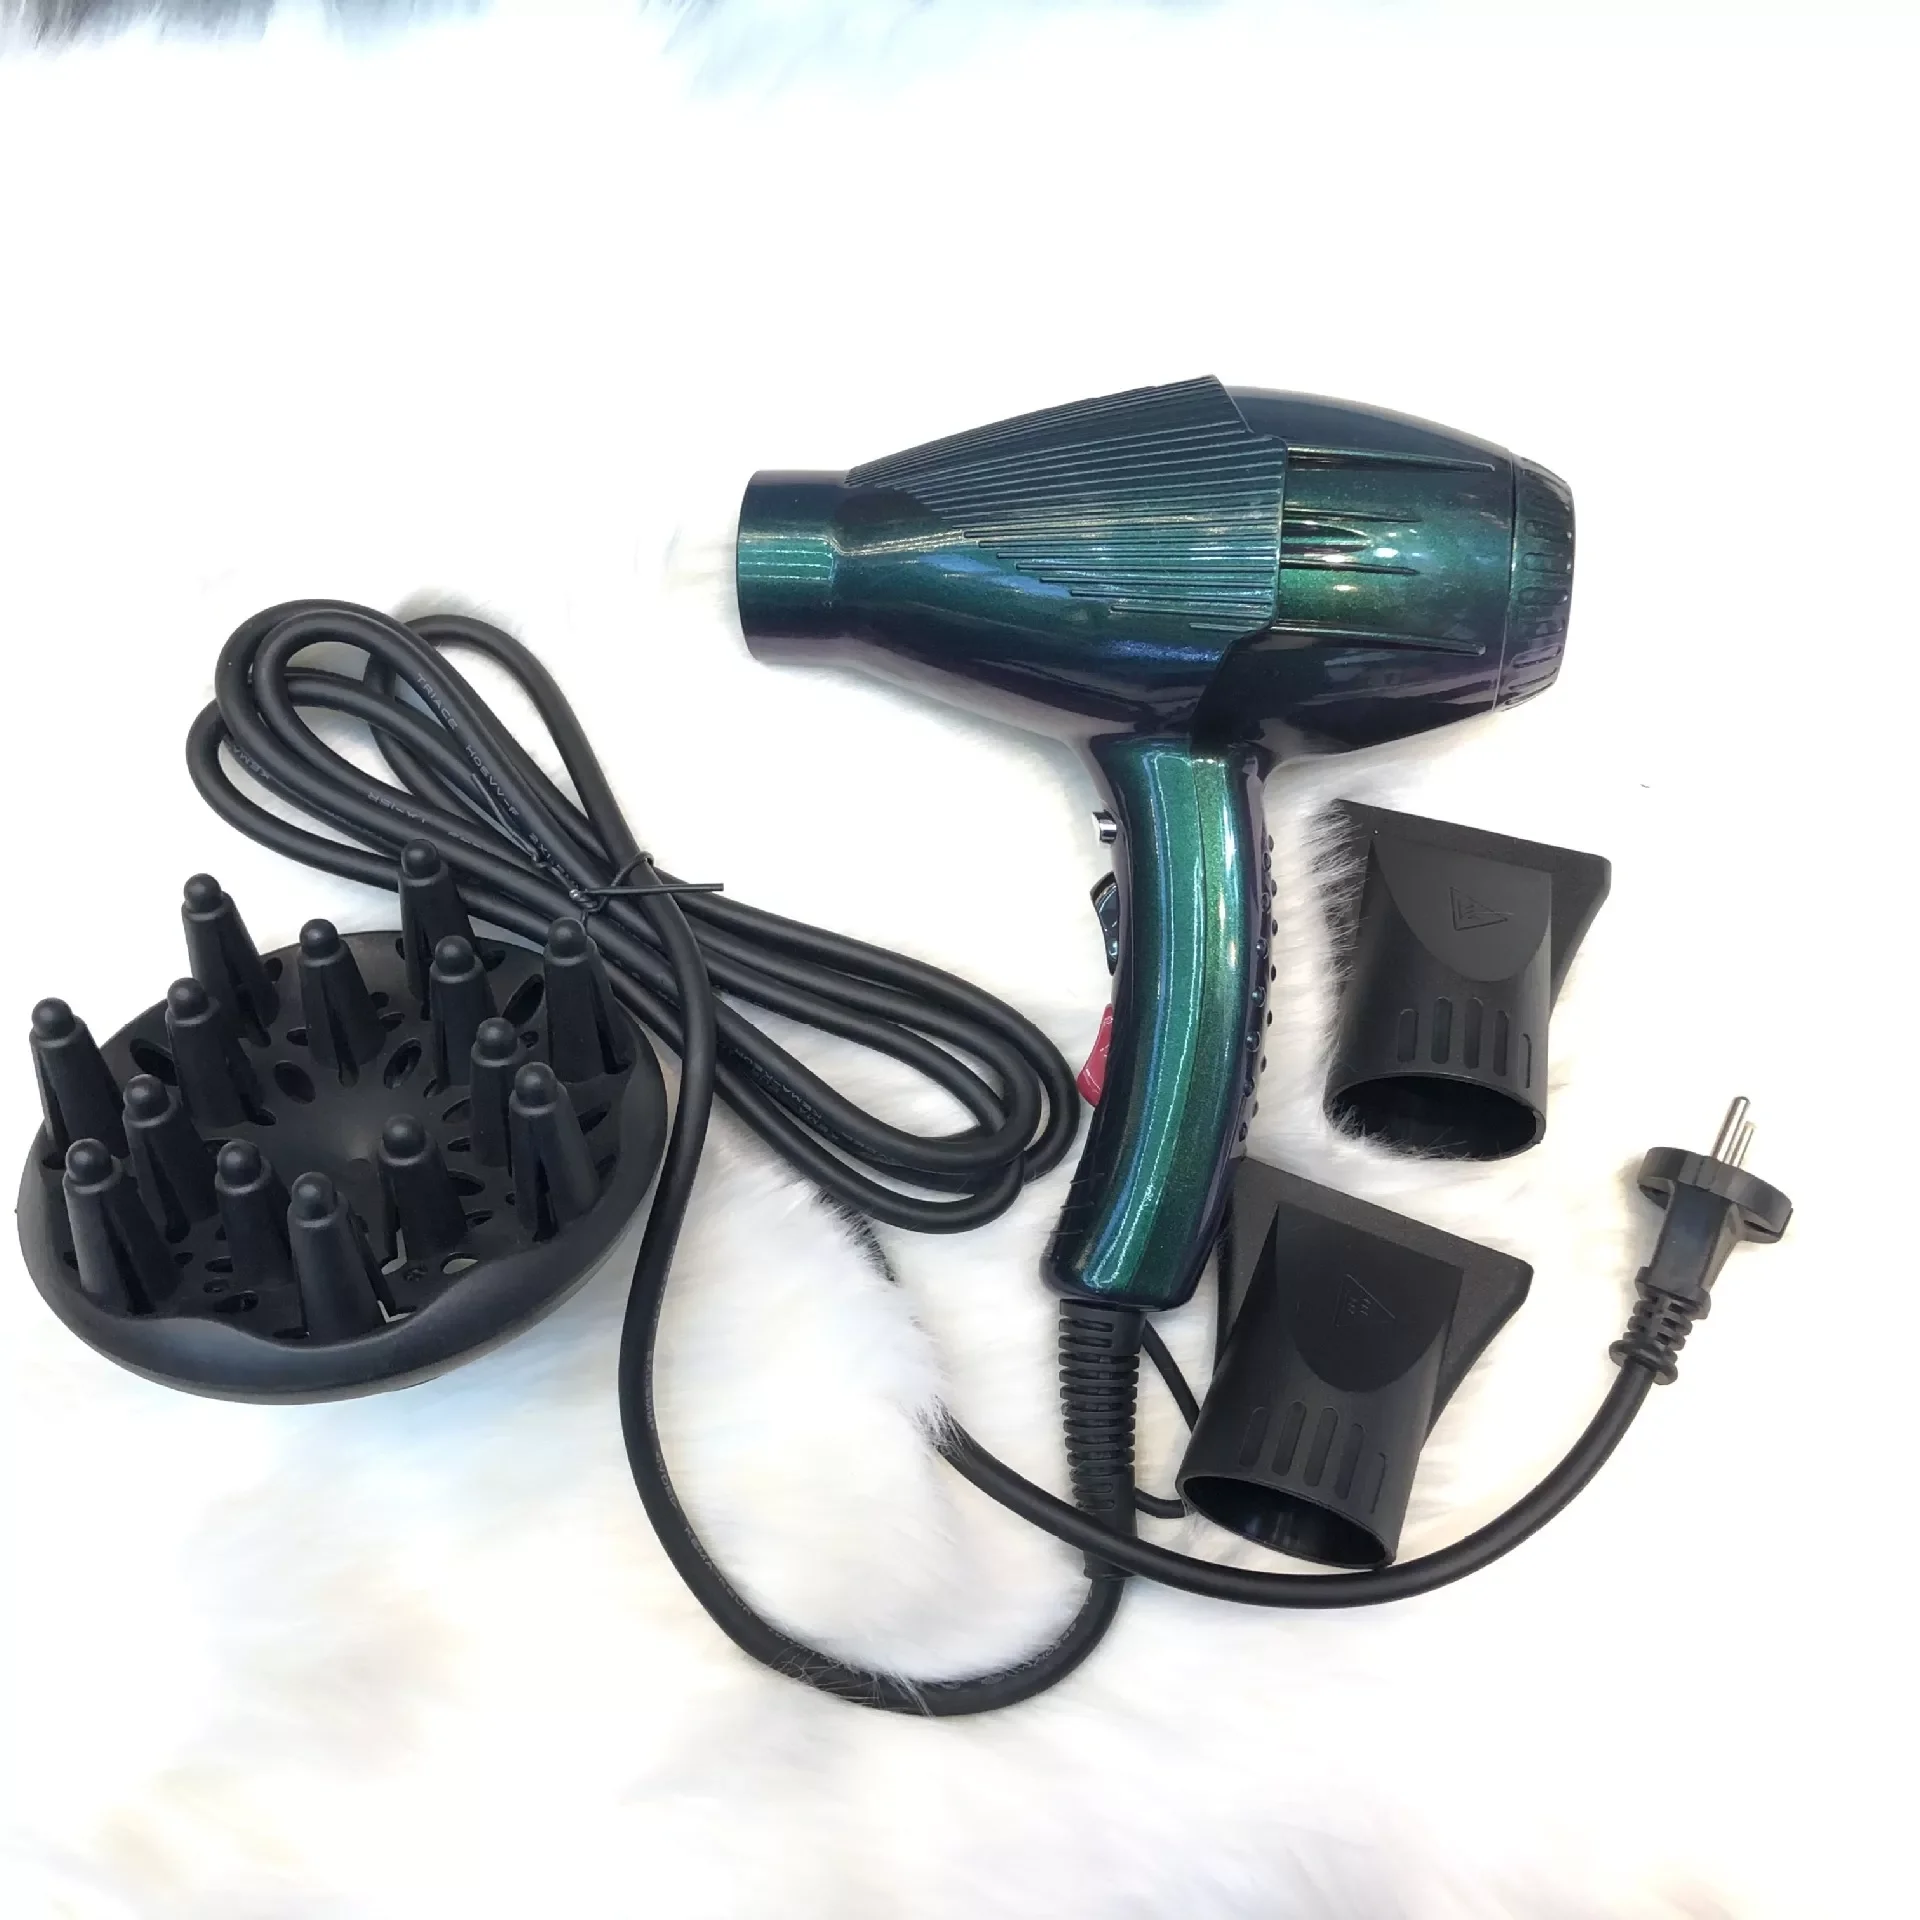 8500w professional hair dryer blow hot air style with two Nozzle hot cold air speed adjust Salon Hair Styling Tool with diffuser enlarge